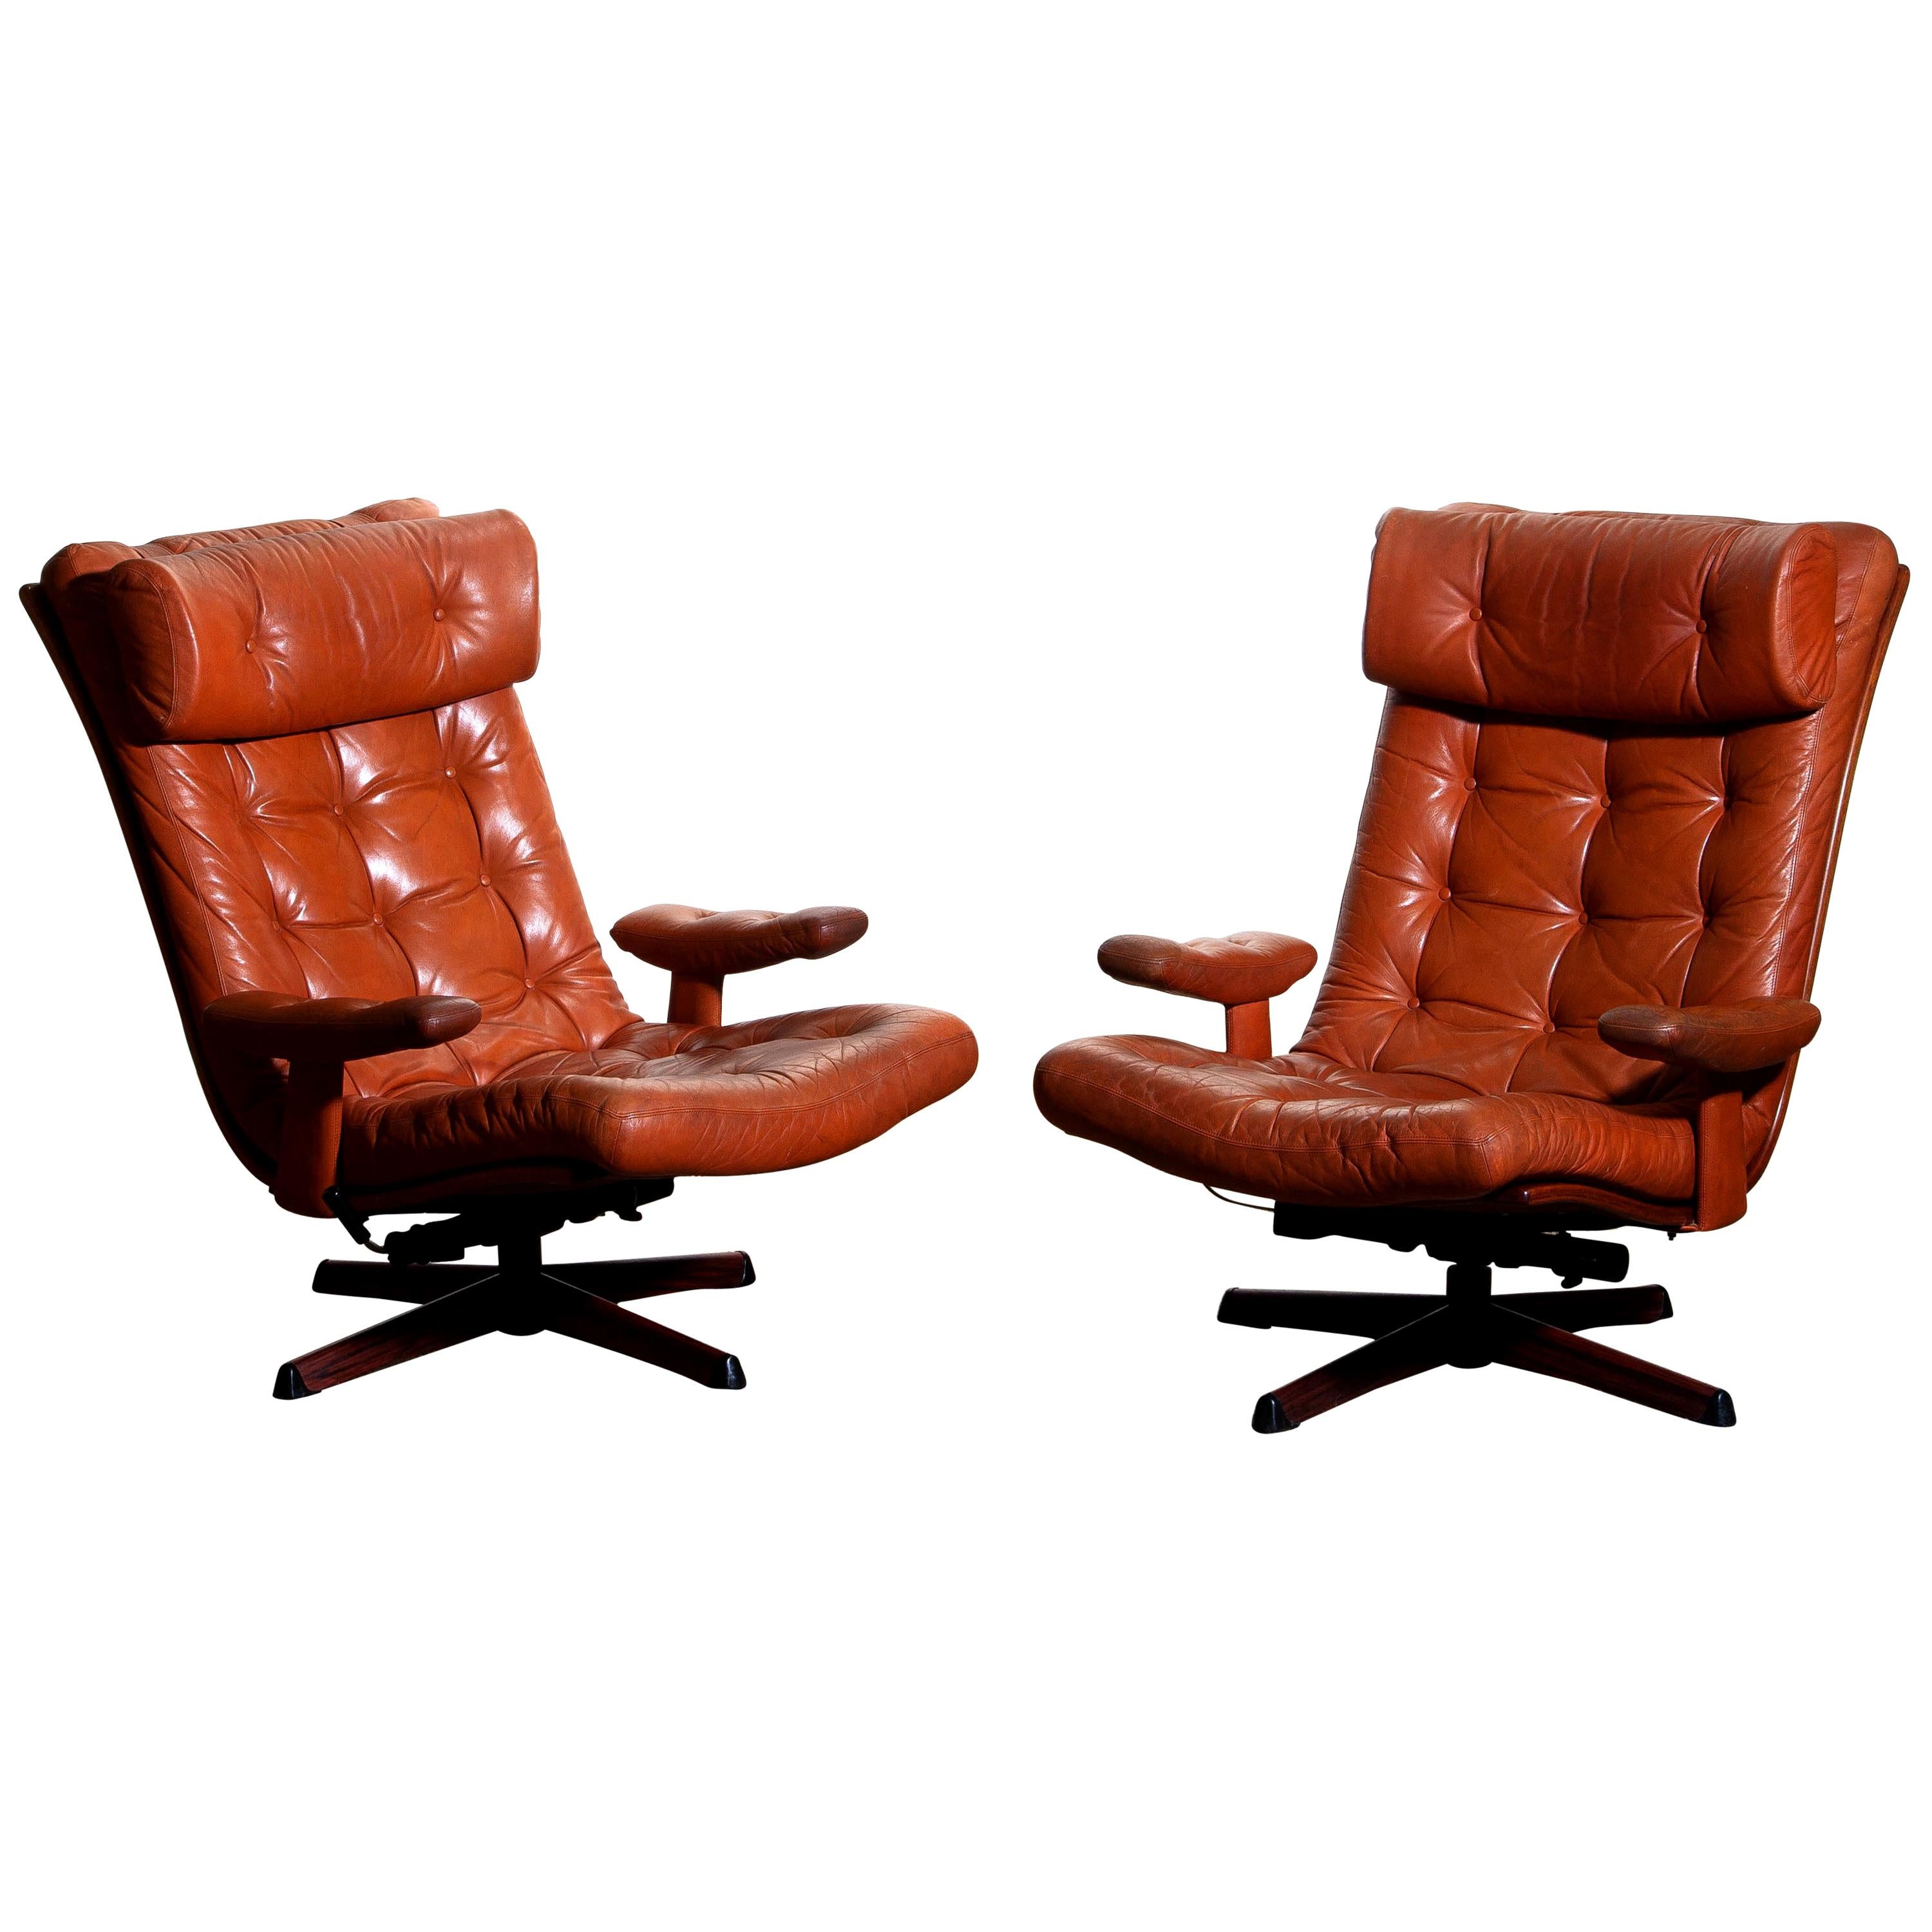 1960s Pair of Cognac Leather Swivel / Relax Lounge Chairs by Göte Design Nässjö